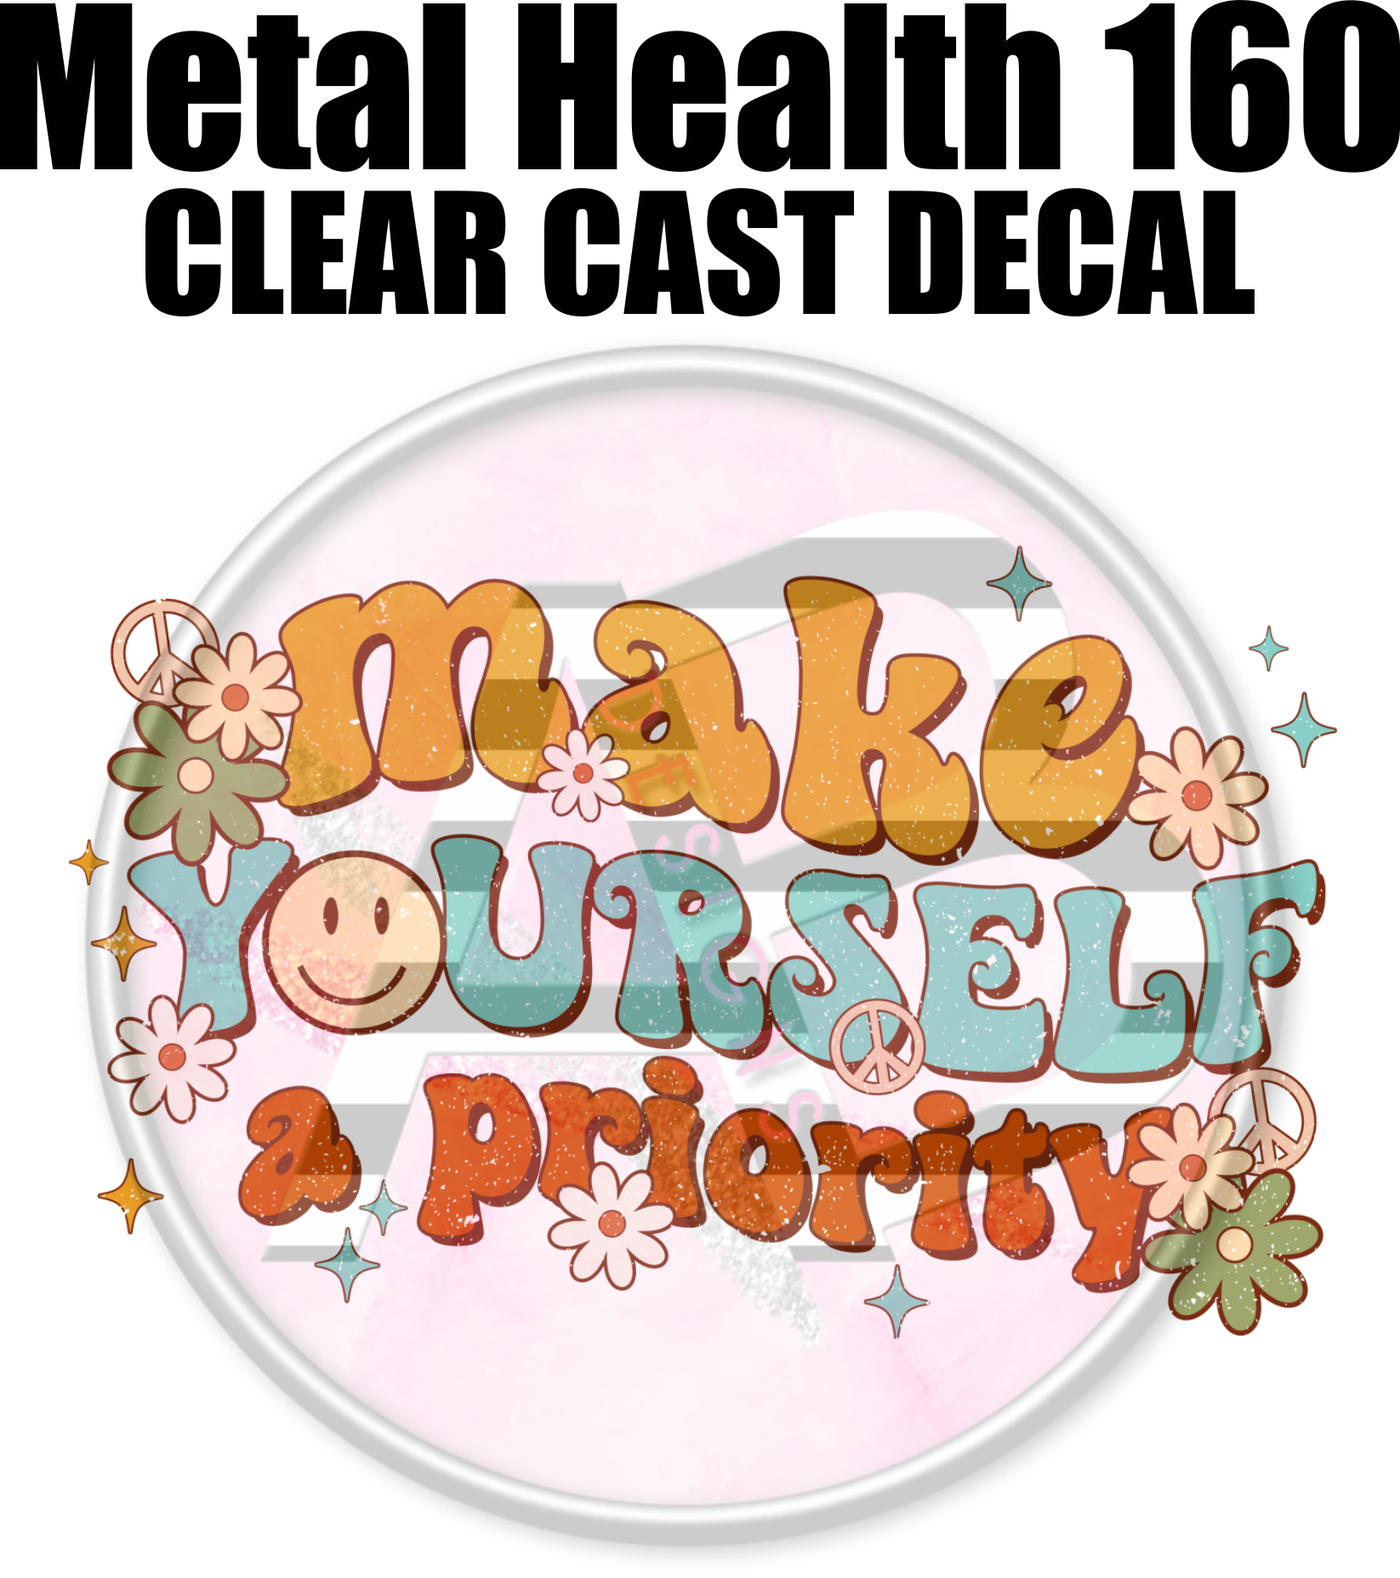 Mental Health 160 - Clear Cast Decal-629